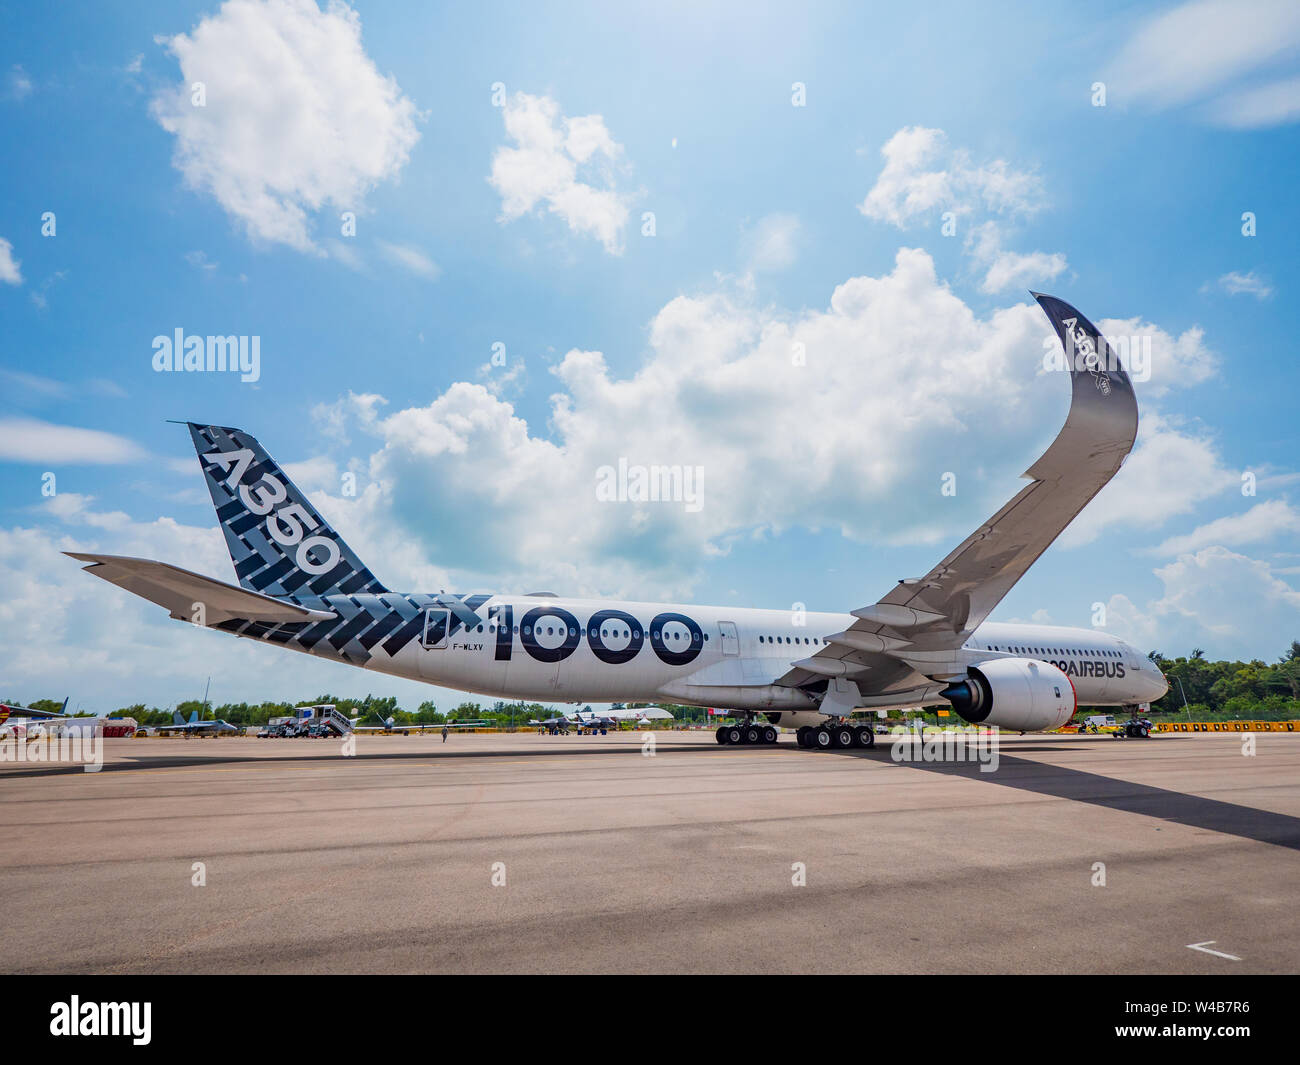 Singapore - February 4, 2018: Airbus A350-1000 XWB in Airbus factory livery during Singapore Airshow at Changi Exhibition Centre in Singapore. Stock Photo